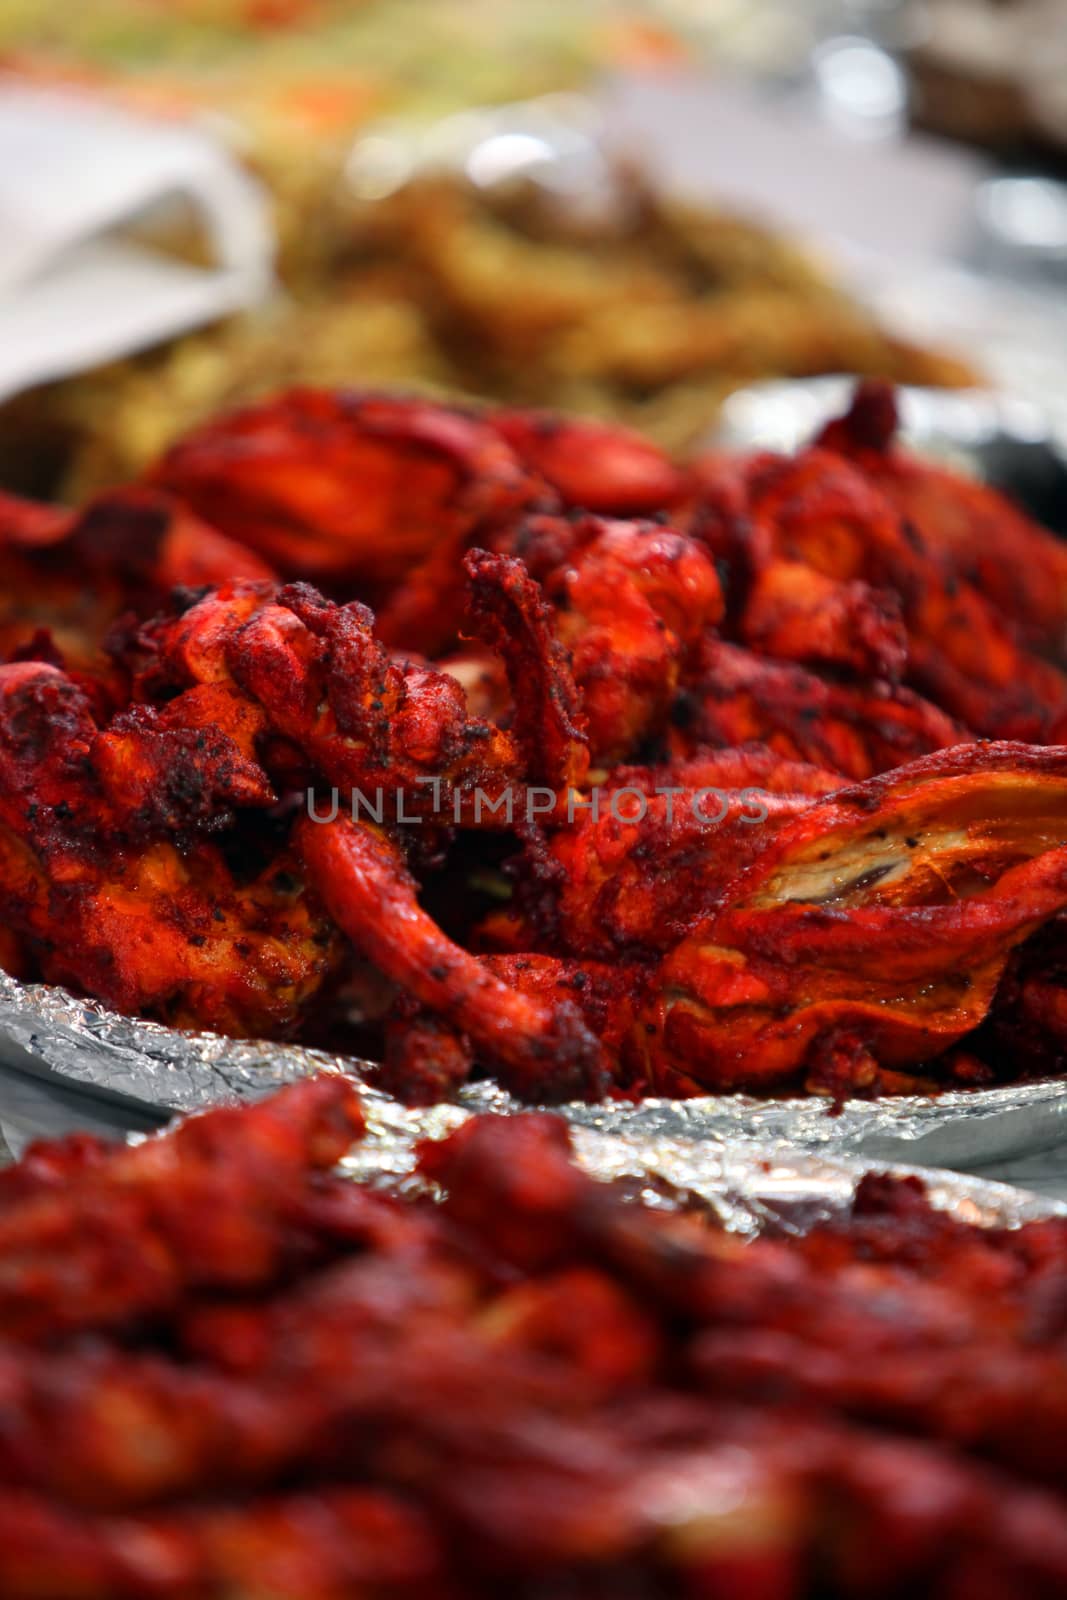 Delicious Tandoori Chicken served for Iftar during the month of Ramadan.